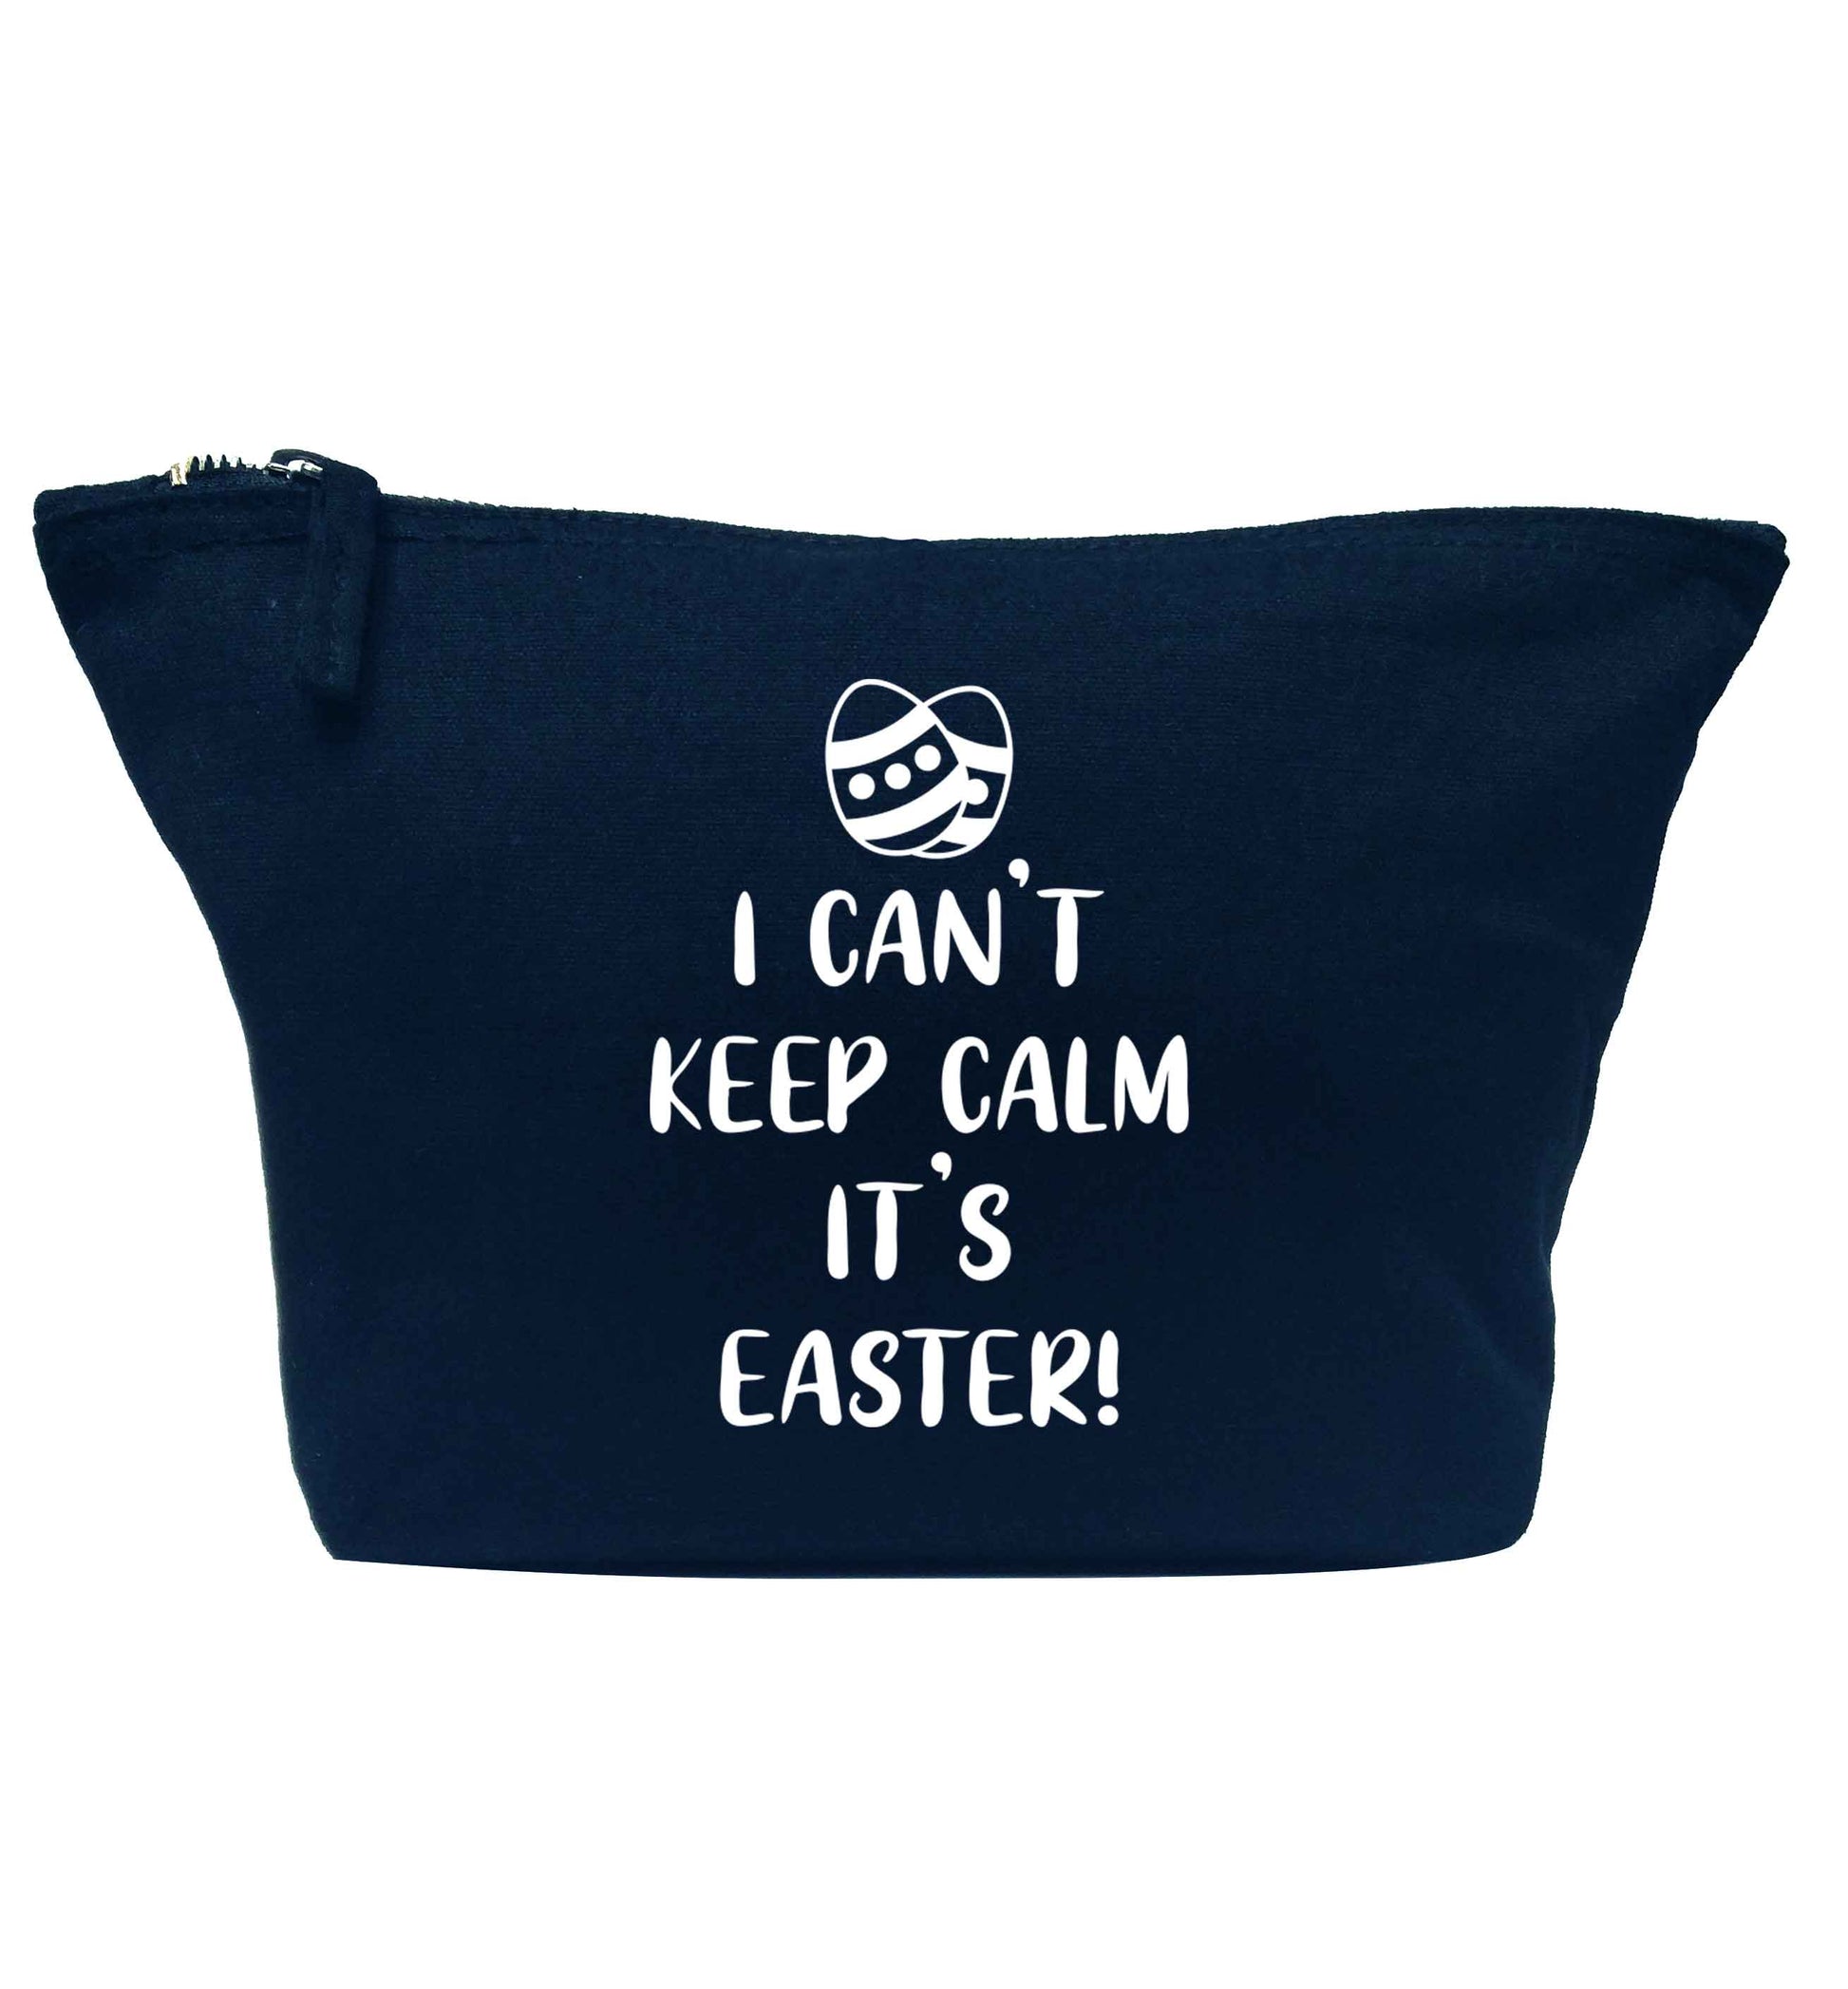 I can't keep calm it's Easter navy makeup bag